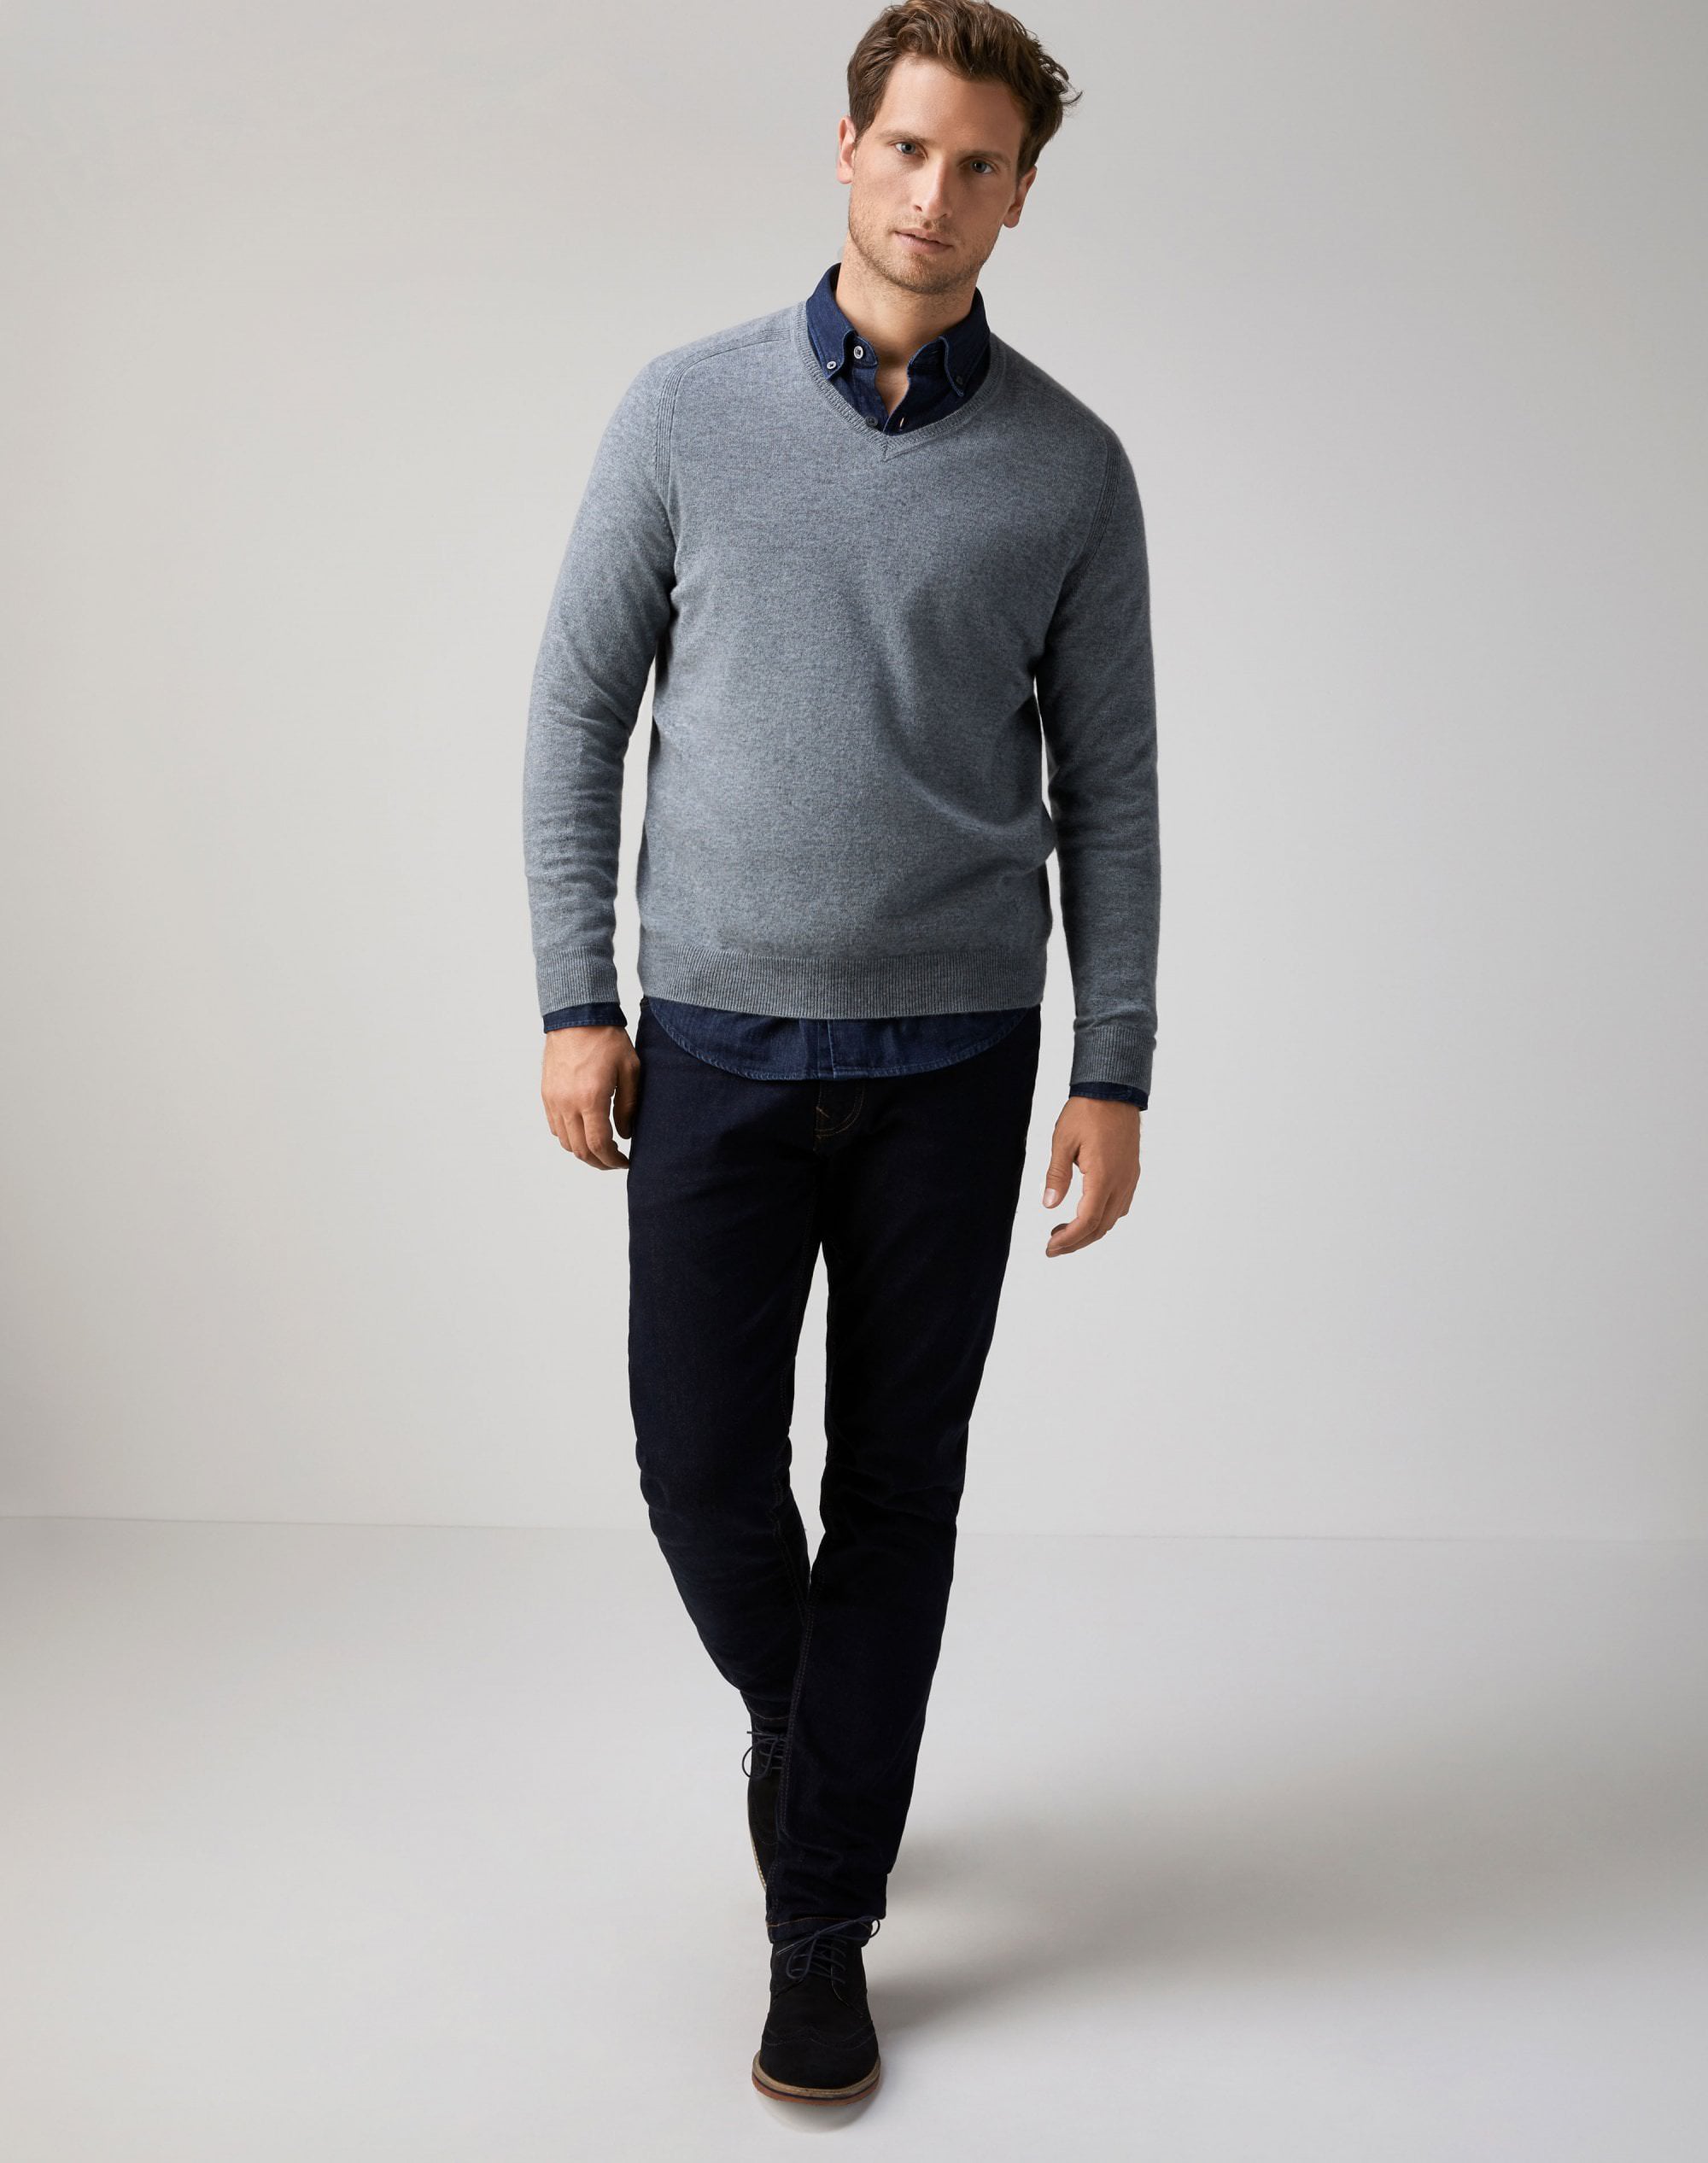 Sale Mens Sweaters & Jumpers | Pure Collection UK